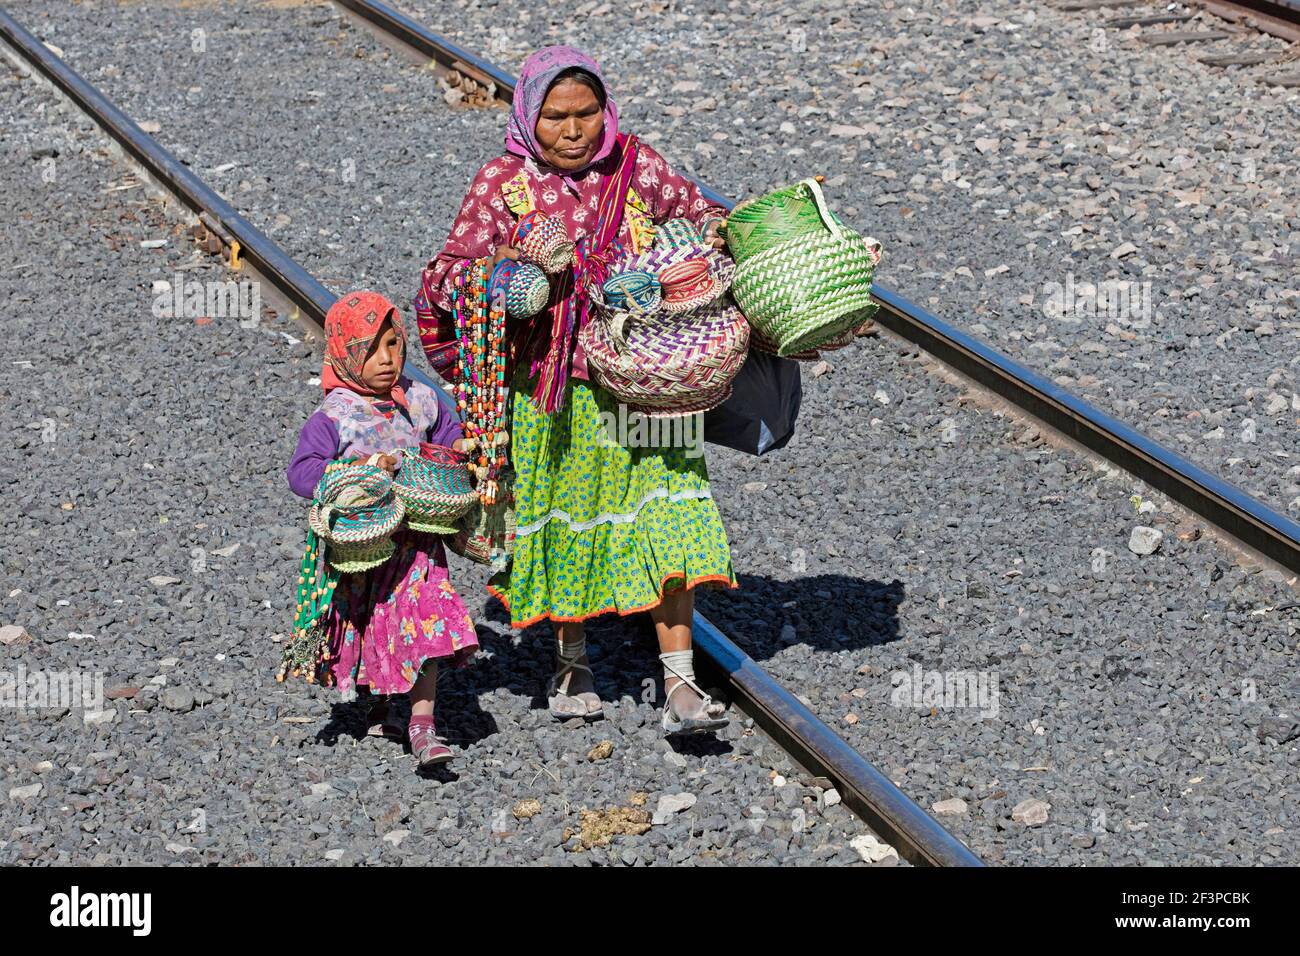 Mexican woman with child selling souvenirs to tourists on the tourist train of the Chepe Express / El Chepe / Chihuahua Pacifico in northwest Mexico Stock Photo